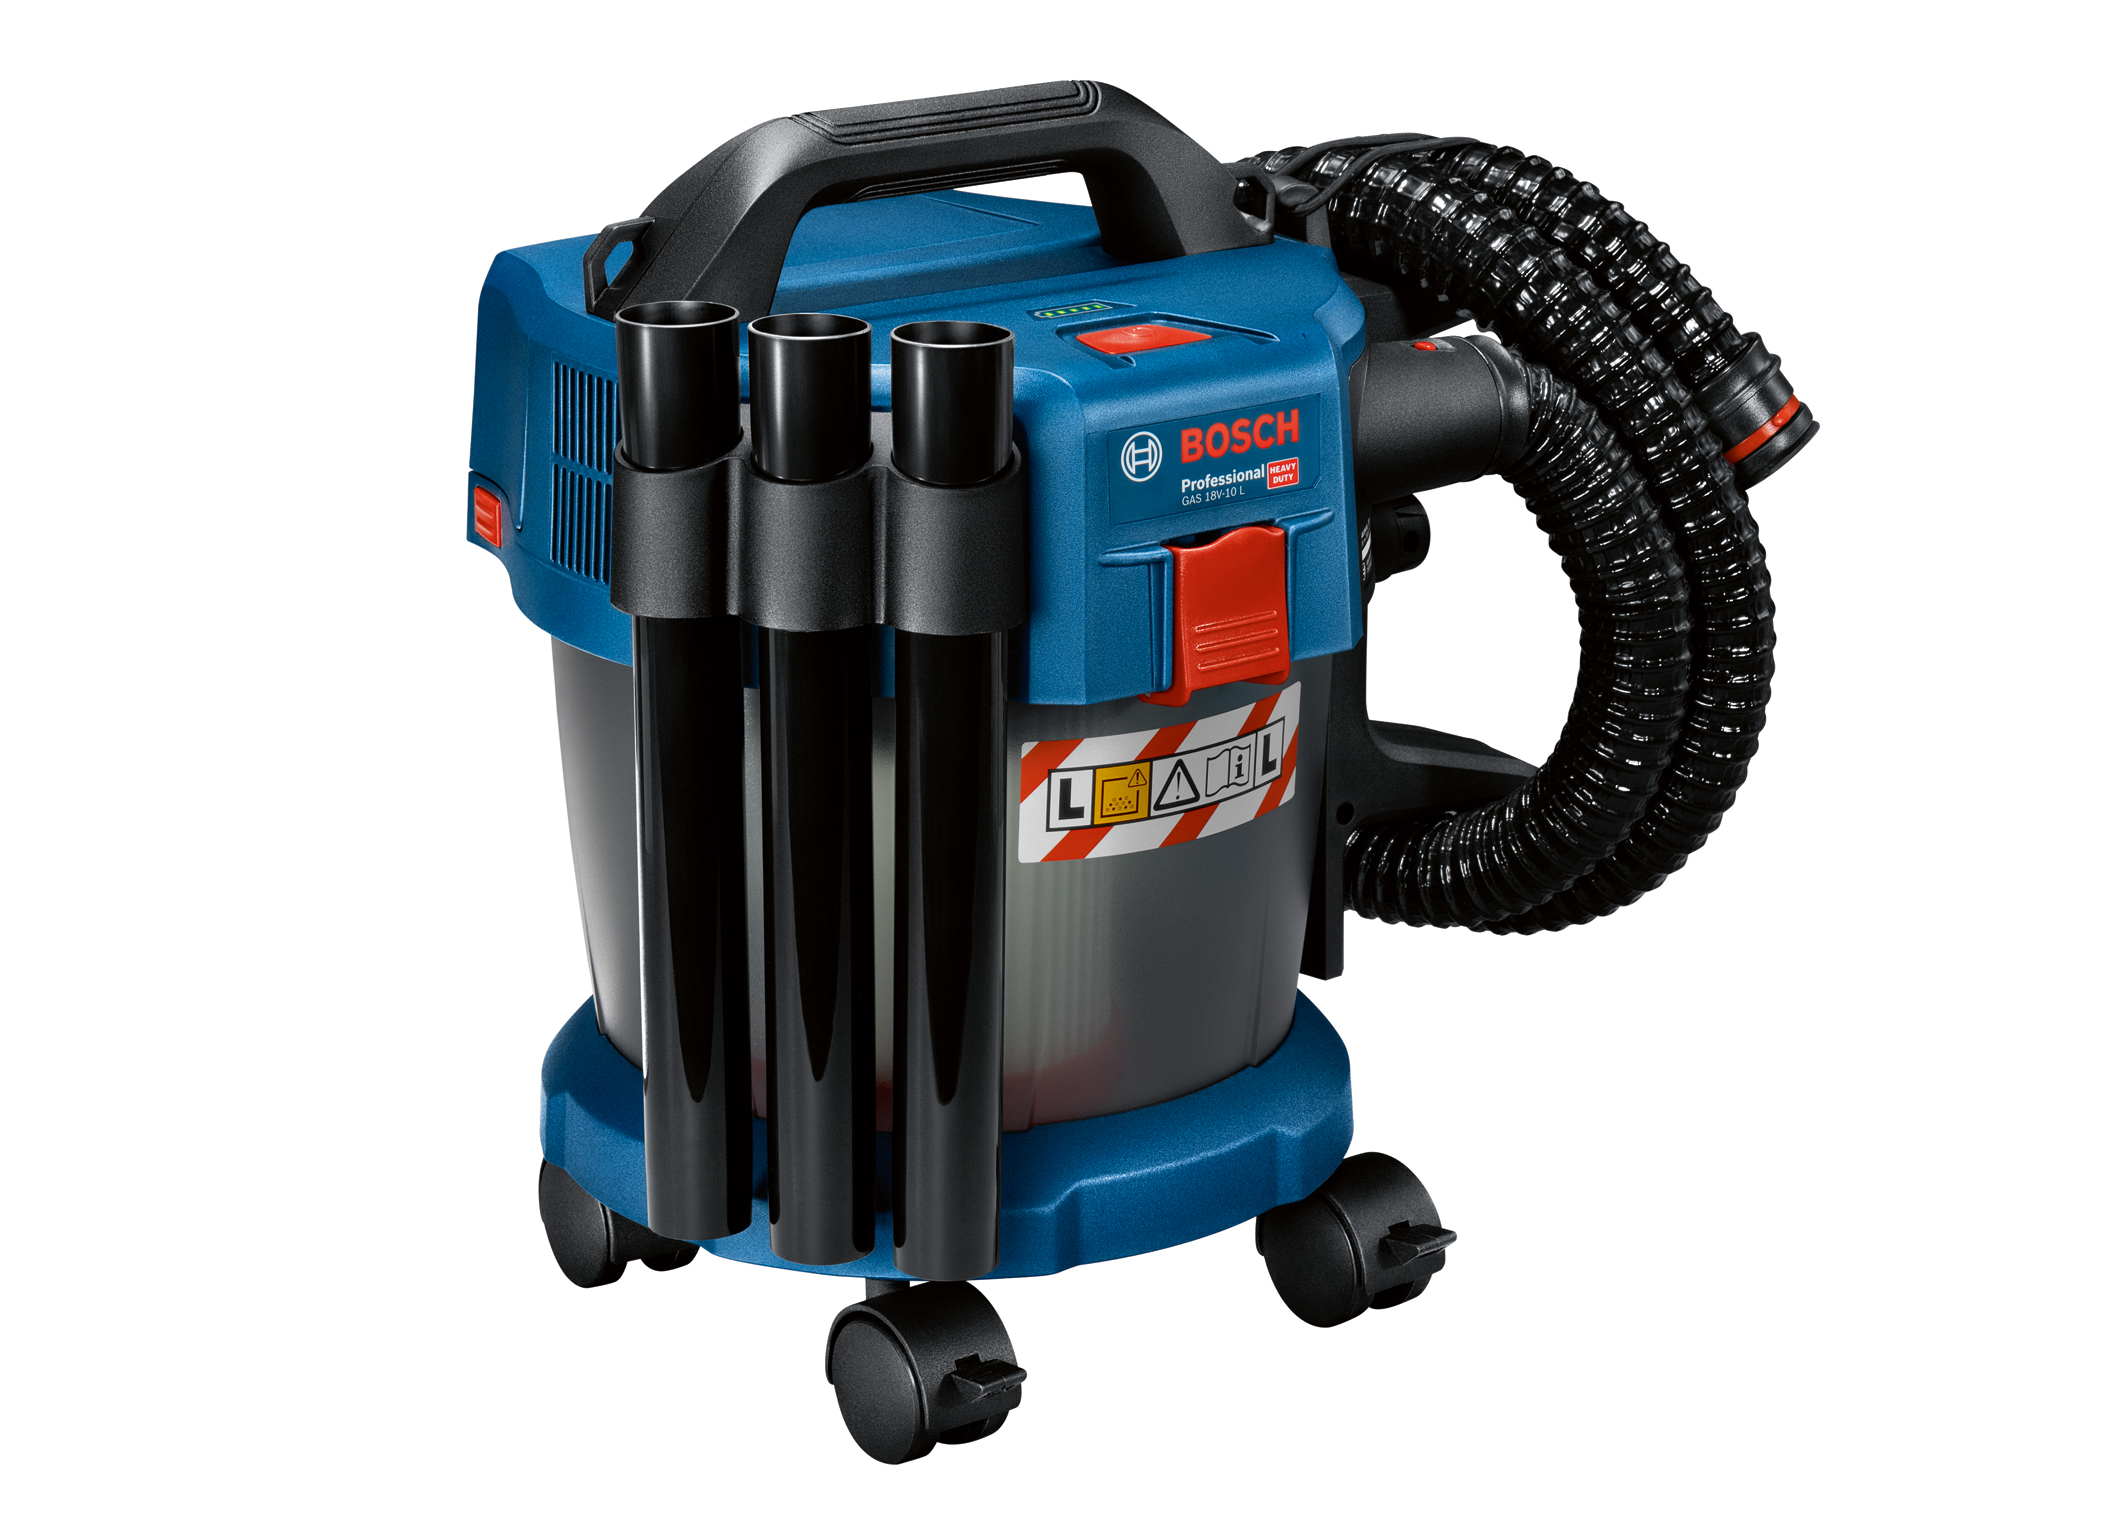 Even better wet/dry extractor due to user feedback: GAS 18V-10 L Professional from Bosch for pros